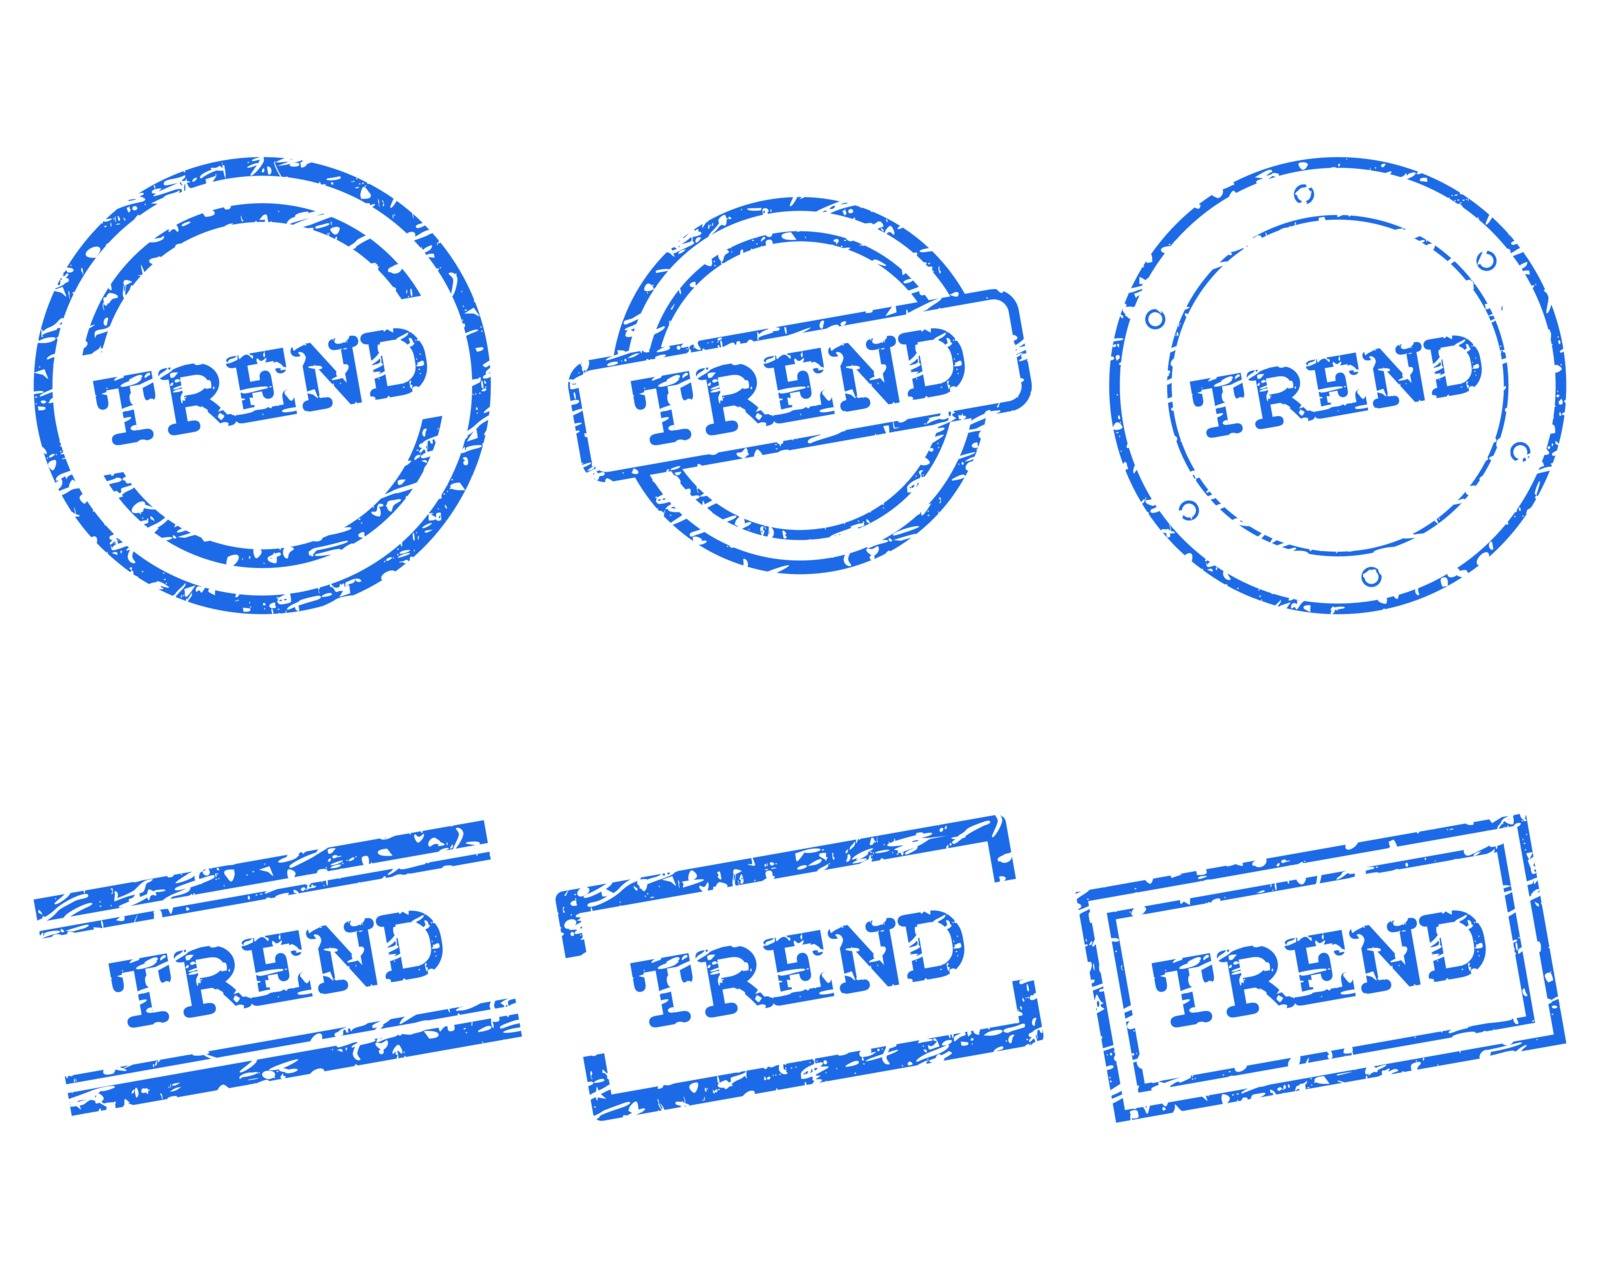 Trend stamps by rbiedermann